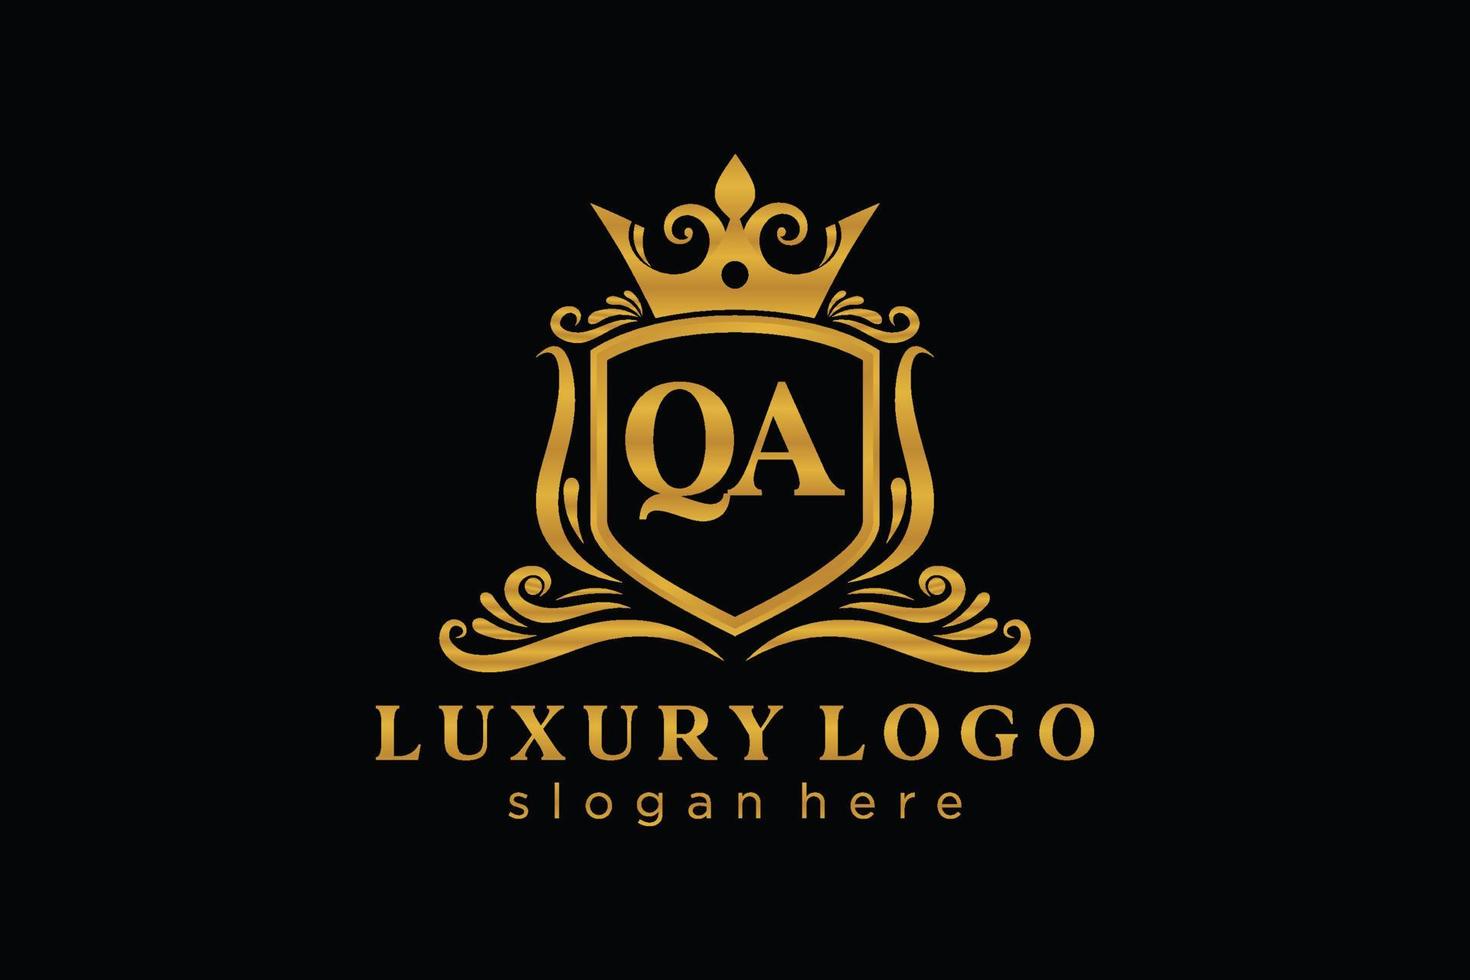 Initial QA Letter Royal Luxury Logo template in vector art for Restaurant, Royalty, Boutique, Cafe, Hotel, Heraldic, Jewelry, Fashion and other vector illustration.